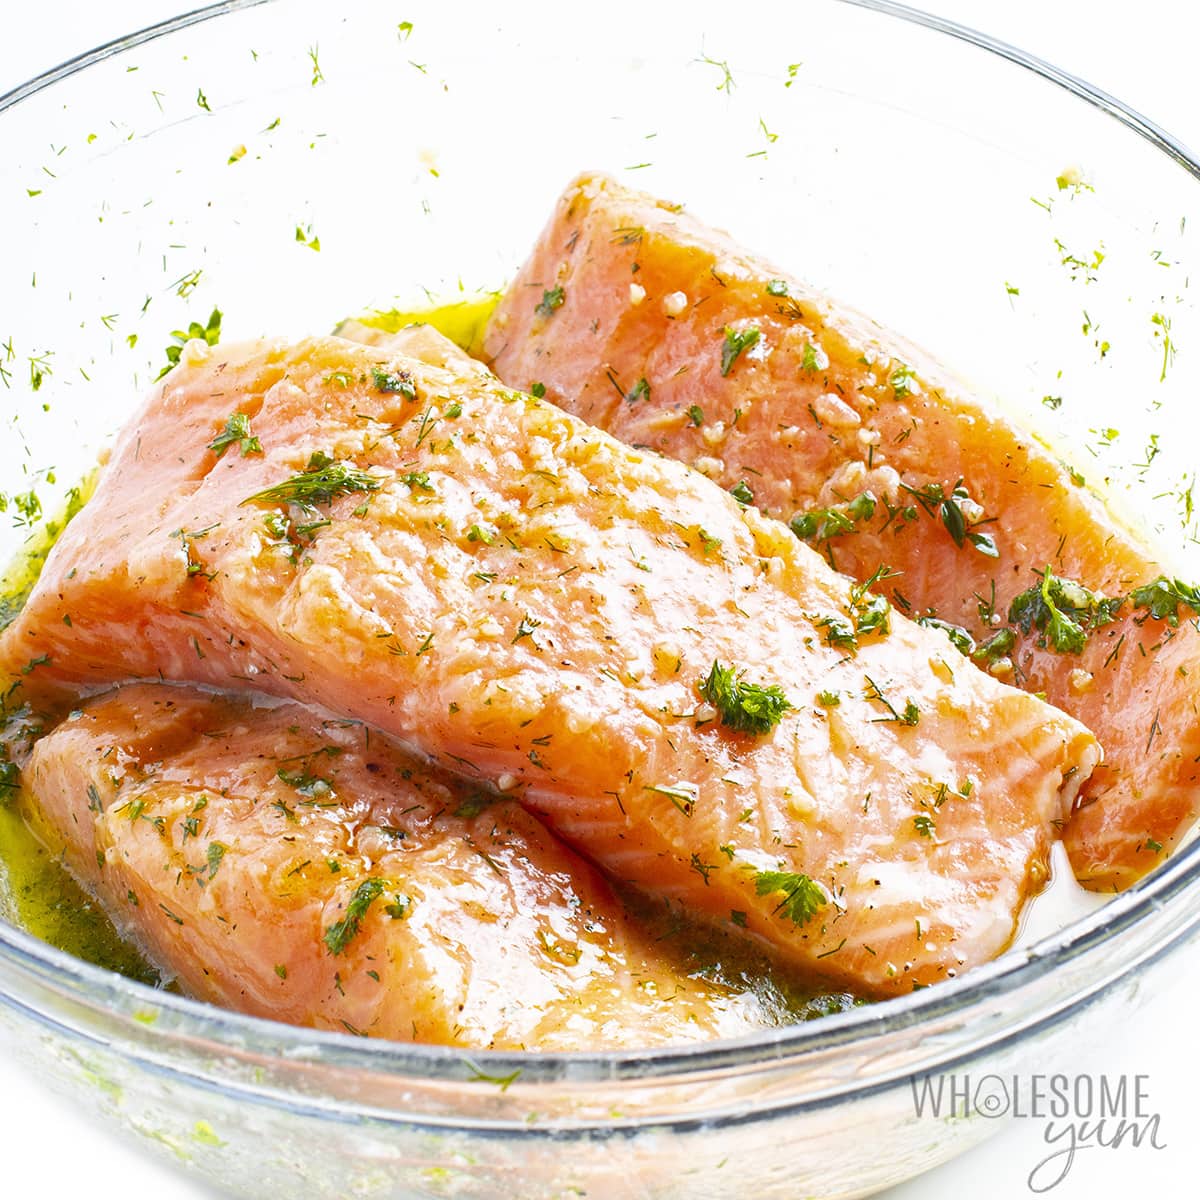 Salmon in a bowl marinating.